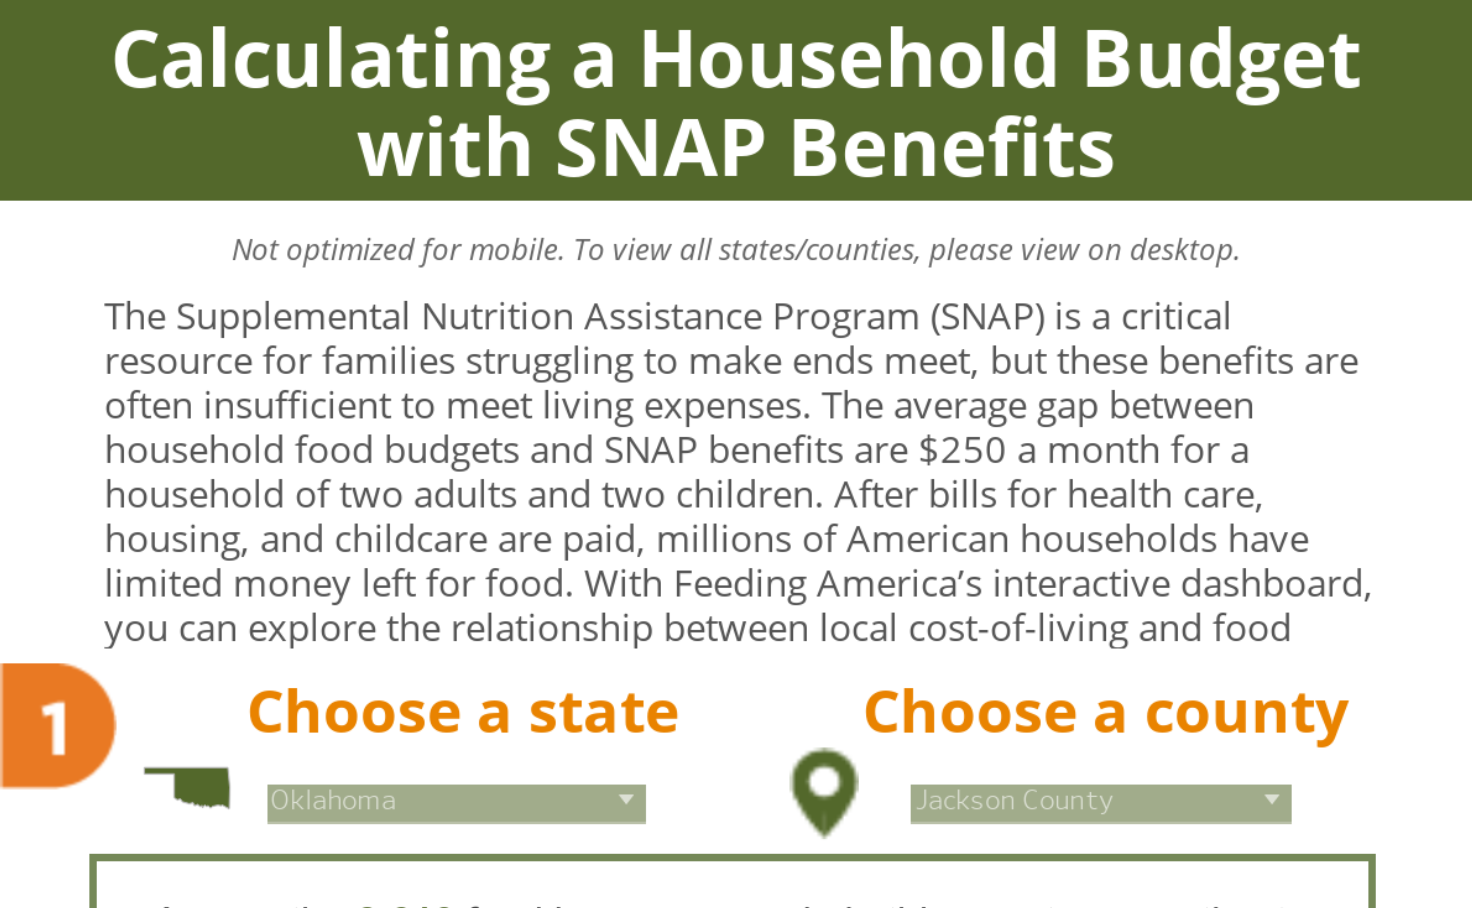 How SNAP Benefits are Calculated